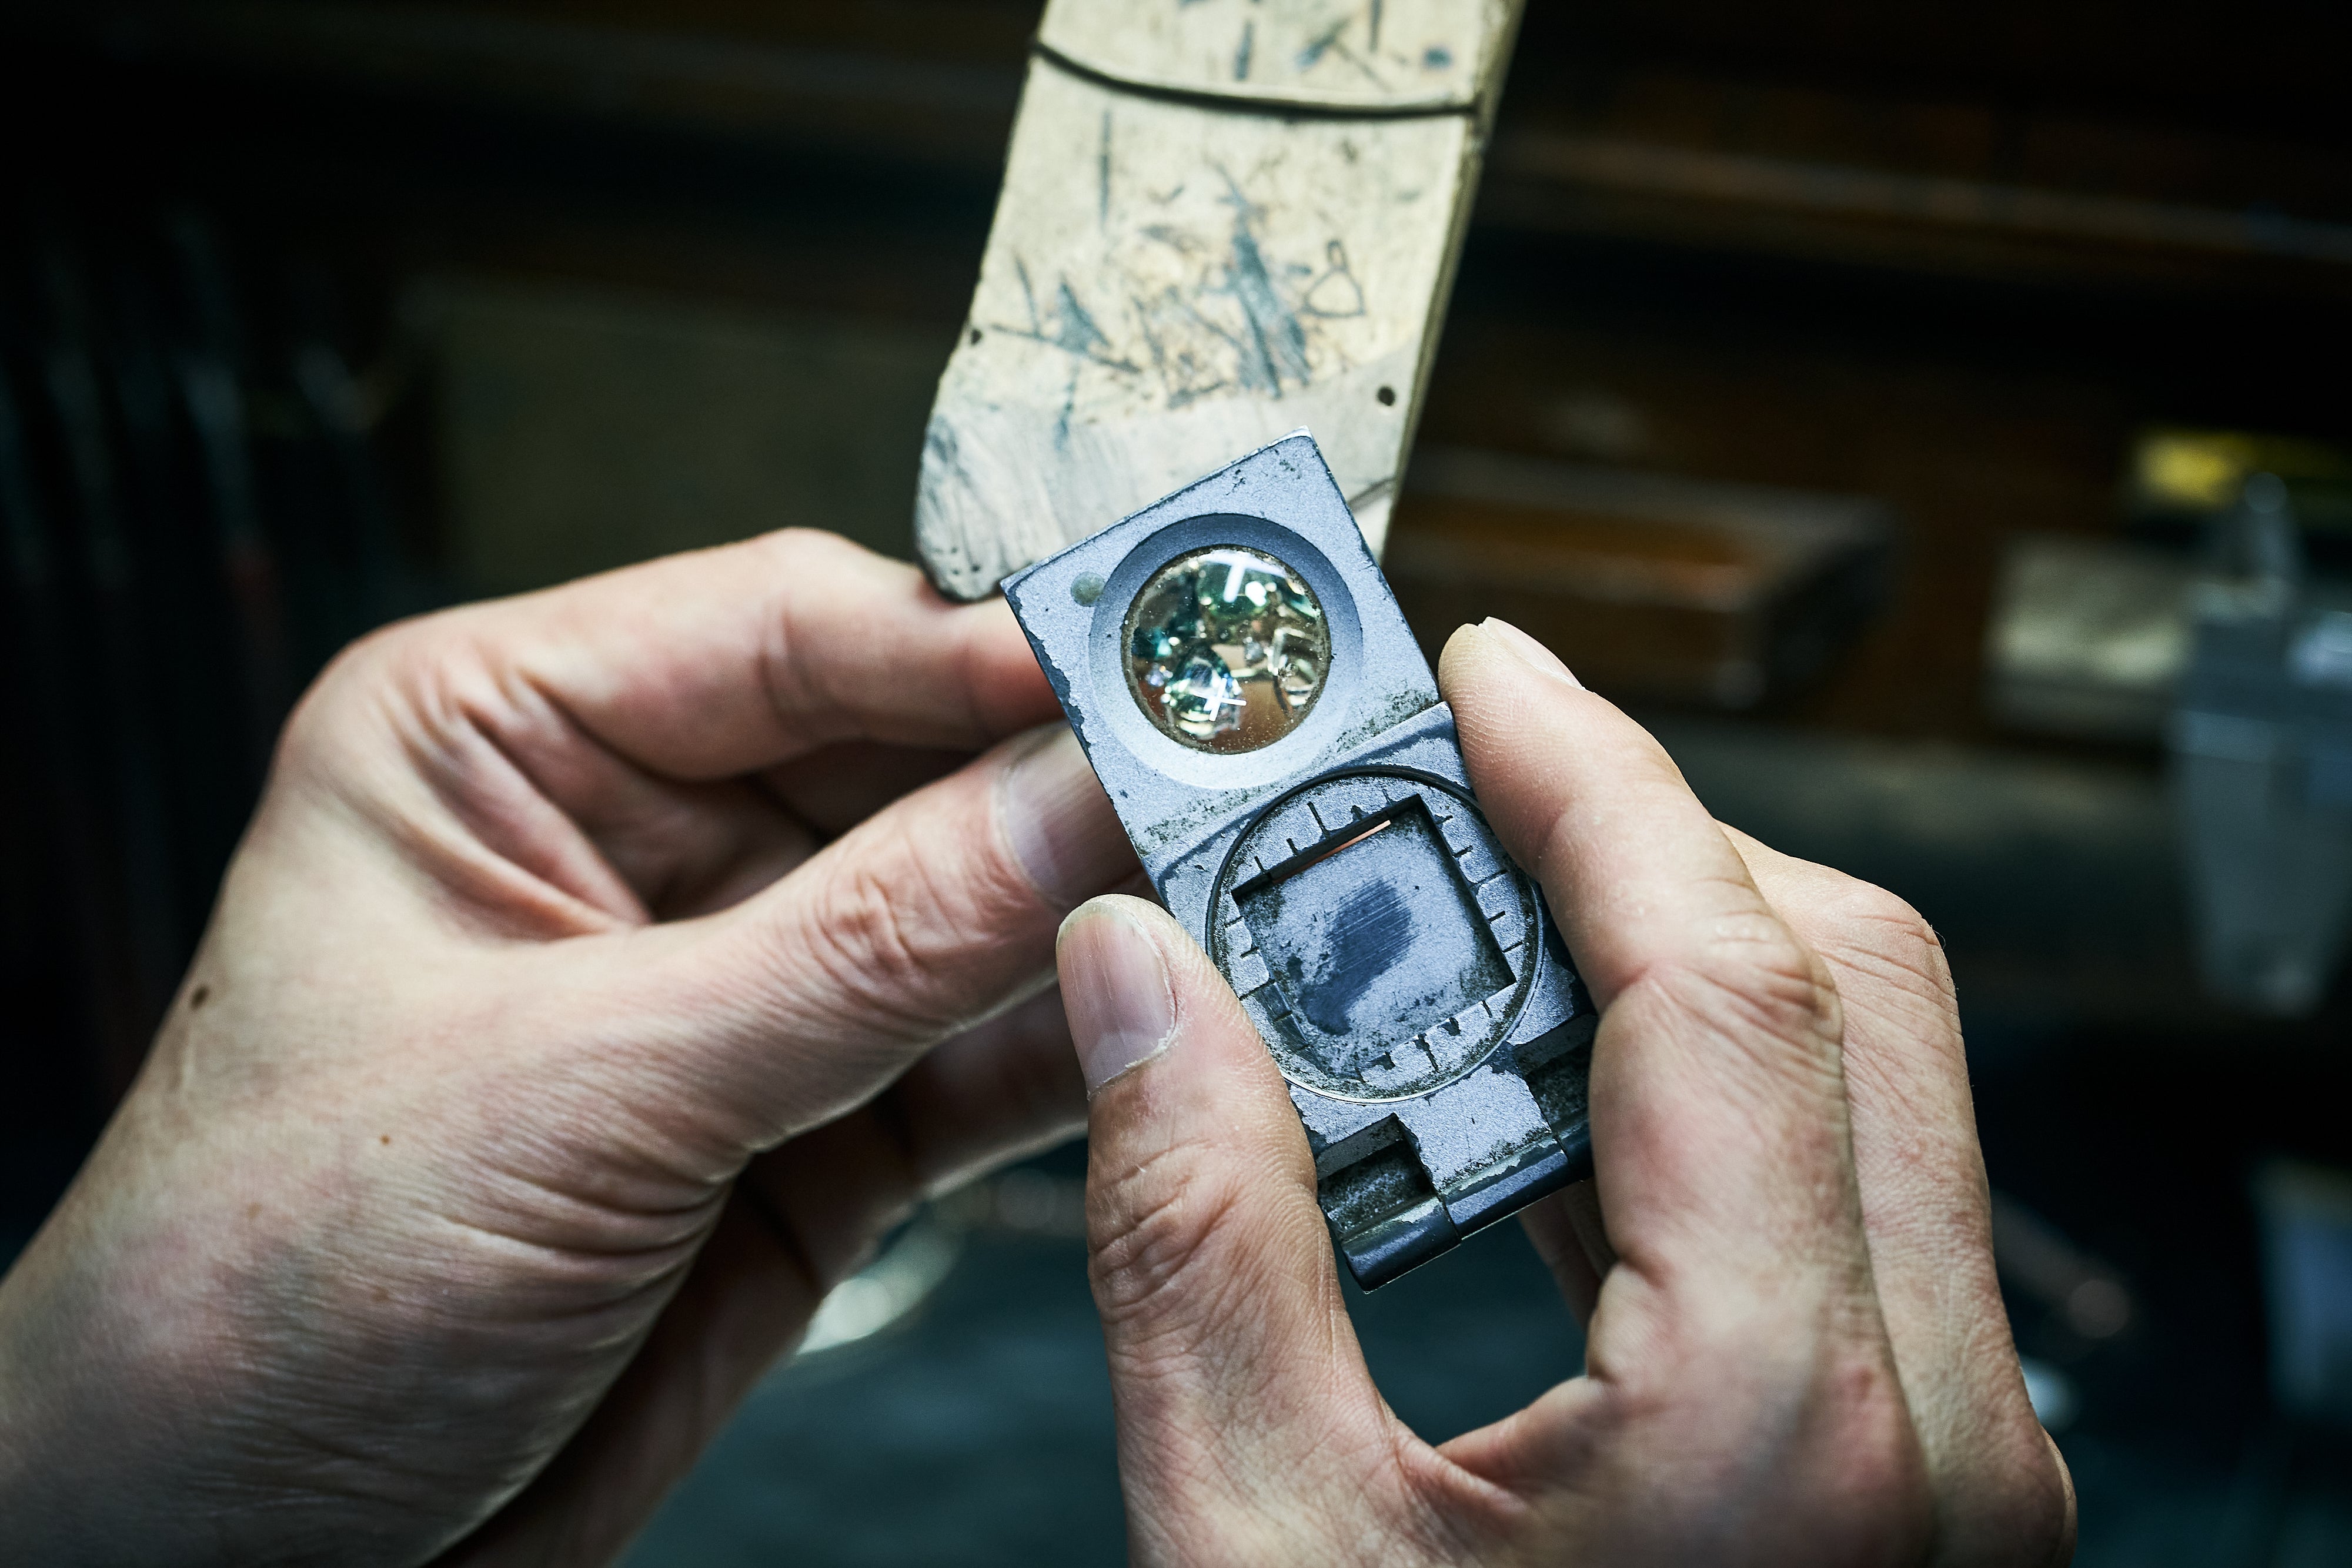 Magnifying glass is used to inspect ring with green gemstones